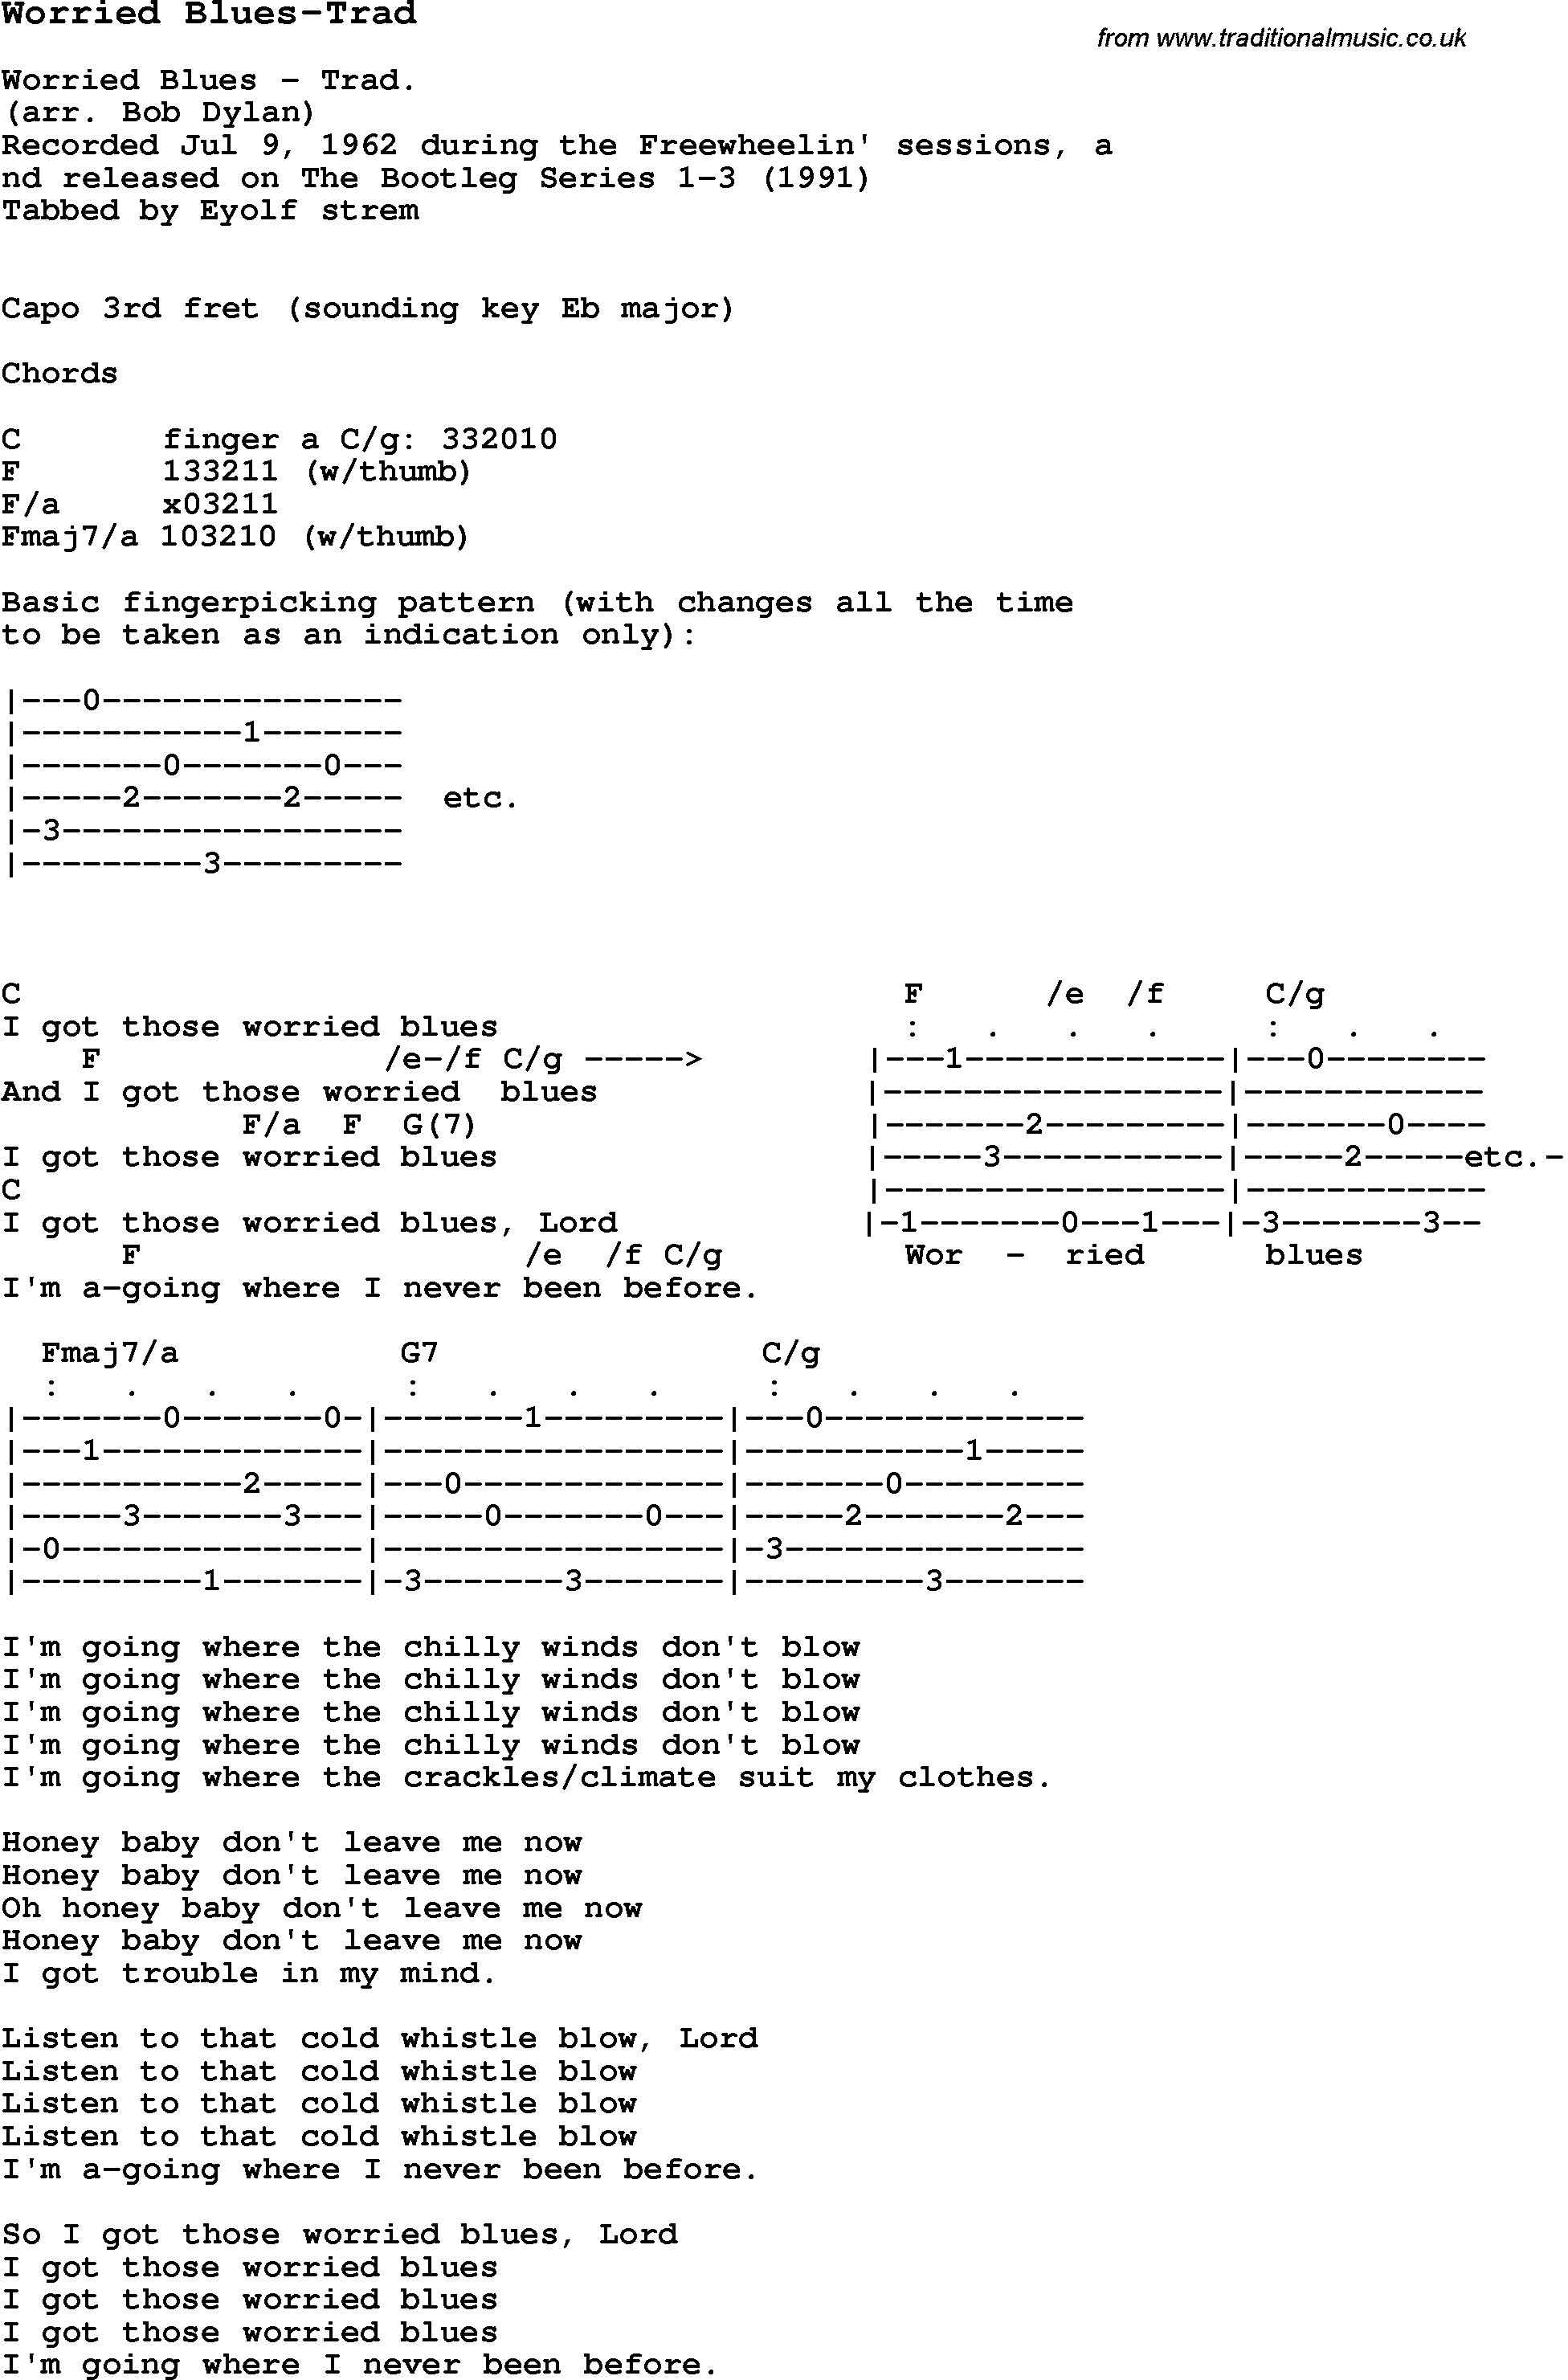 Blues Guitar Song, lyrics, chords, tablature, playing hints for Worried Blues-Trad